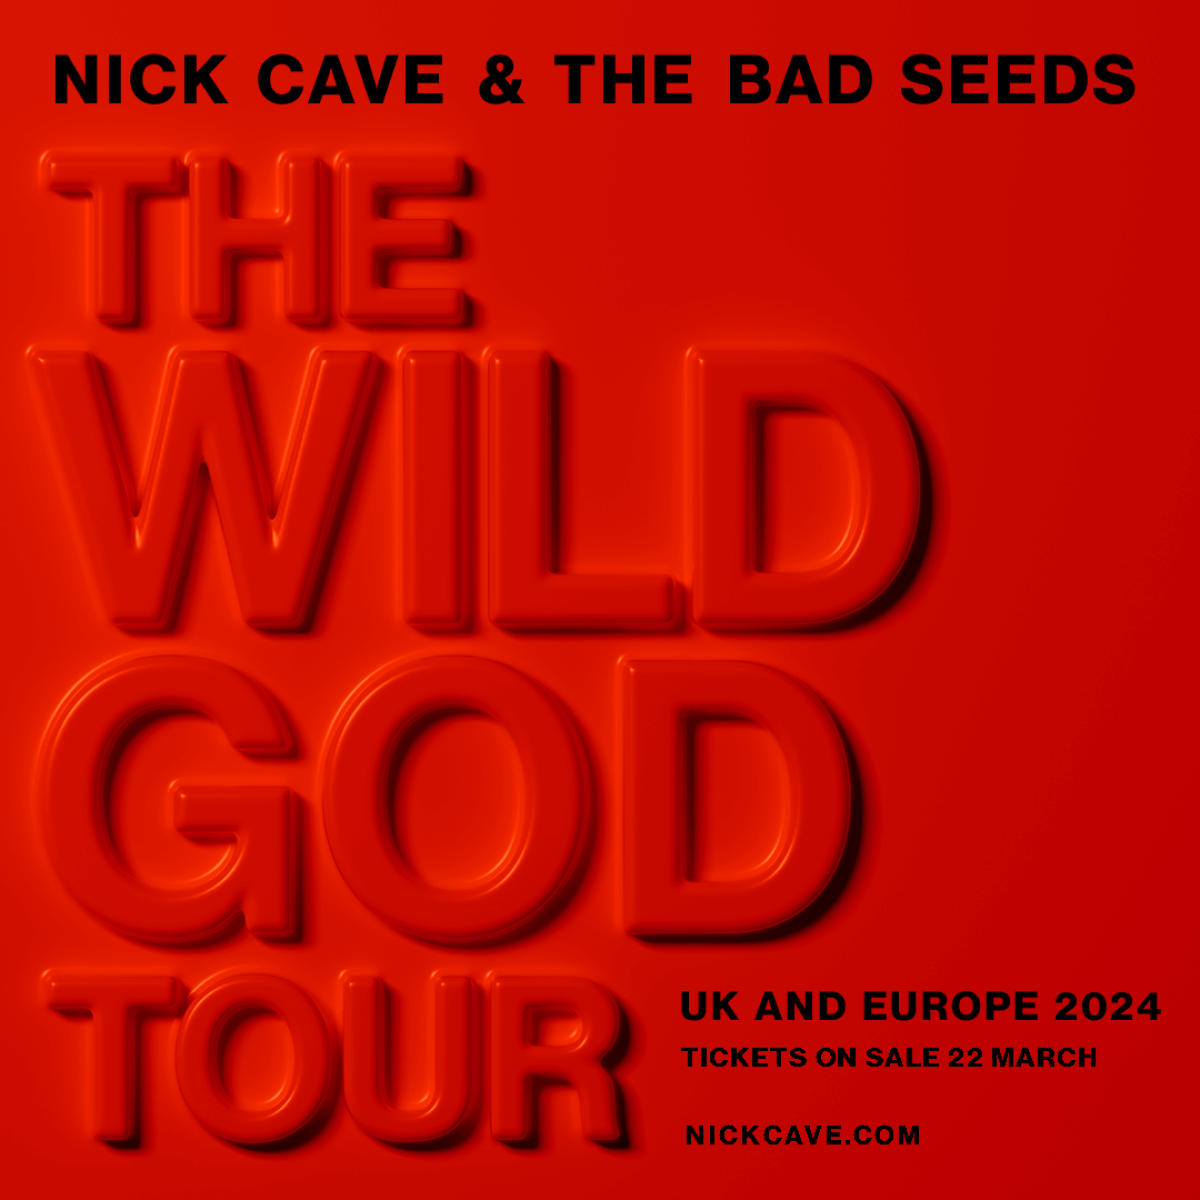 Nick Cave and the Bad Seeds - The Wild God Tour en Rudolf Weber-Arena Tickets